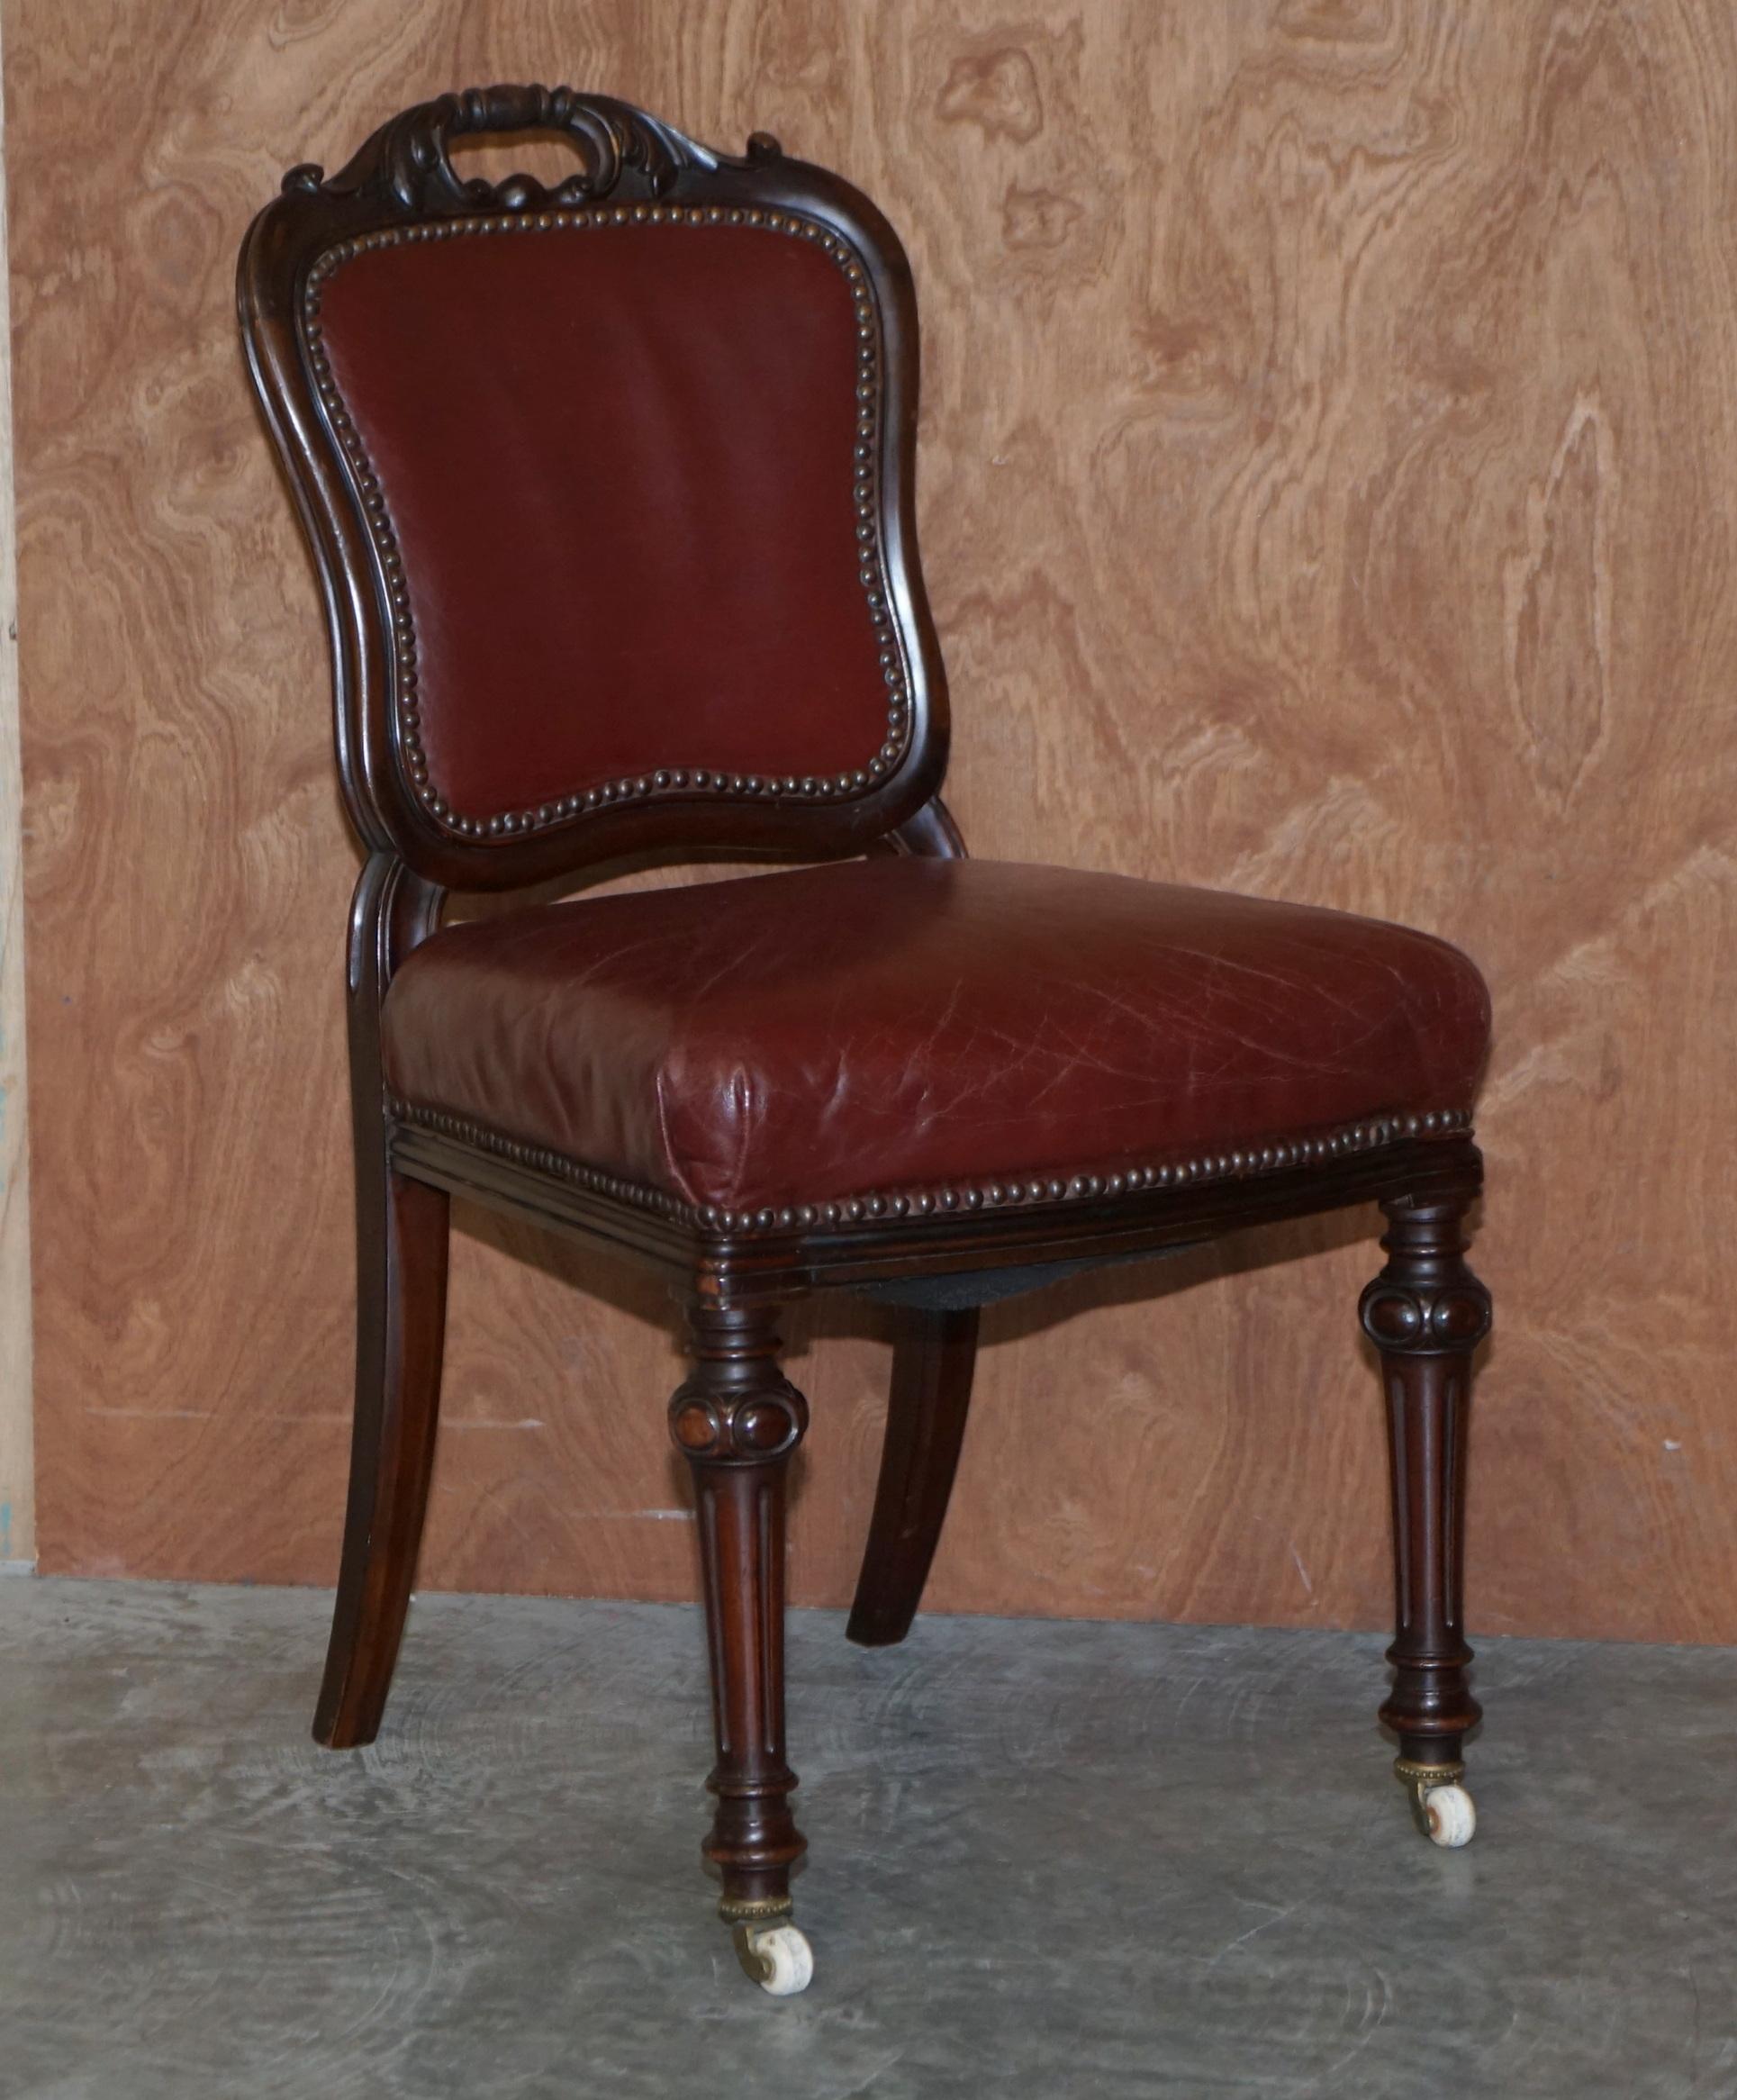 We are delighted to offer for sale this suite of six absolutely exquisite quality hand made in England Mahogany framed dining chairs after Gillows

These chairs are honestly the finest quality, they are certainly made by Gillows of Lancaster and